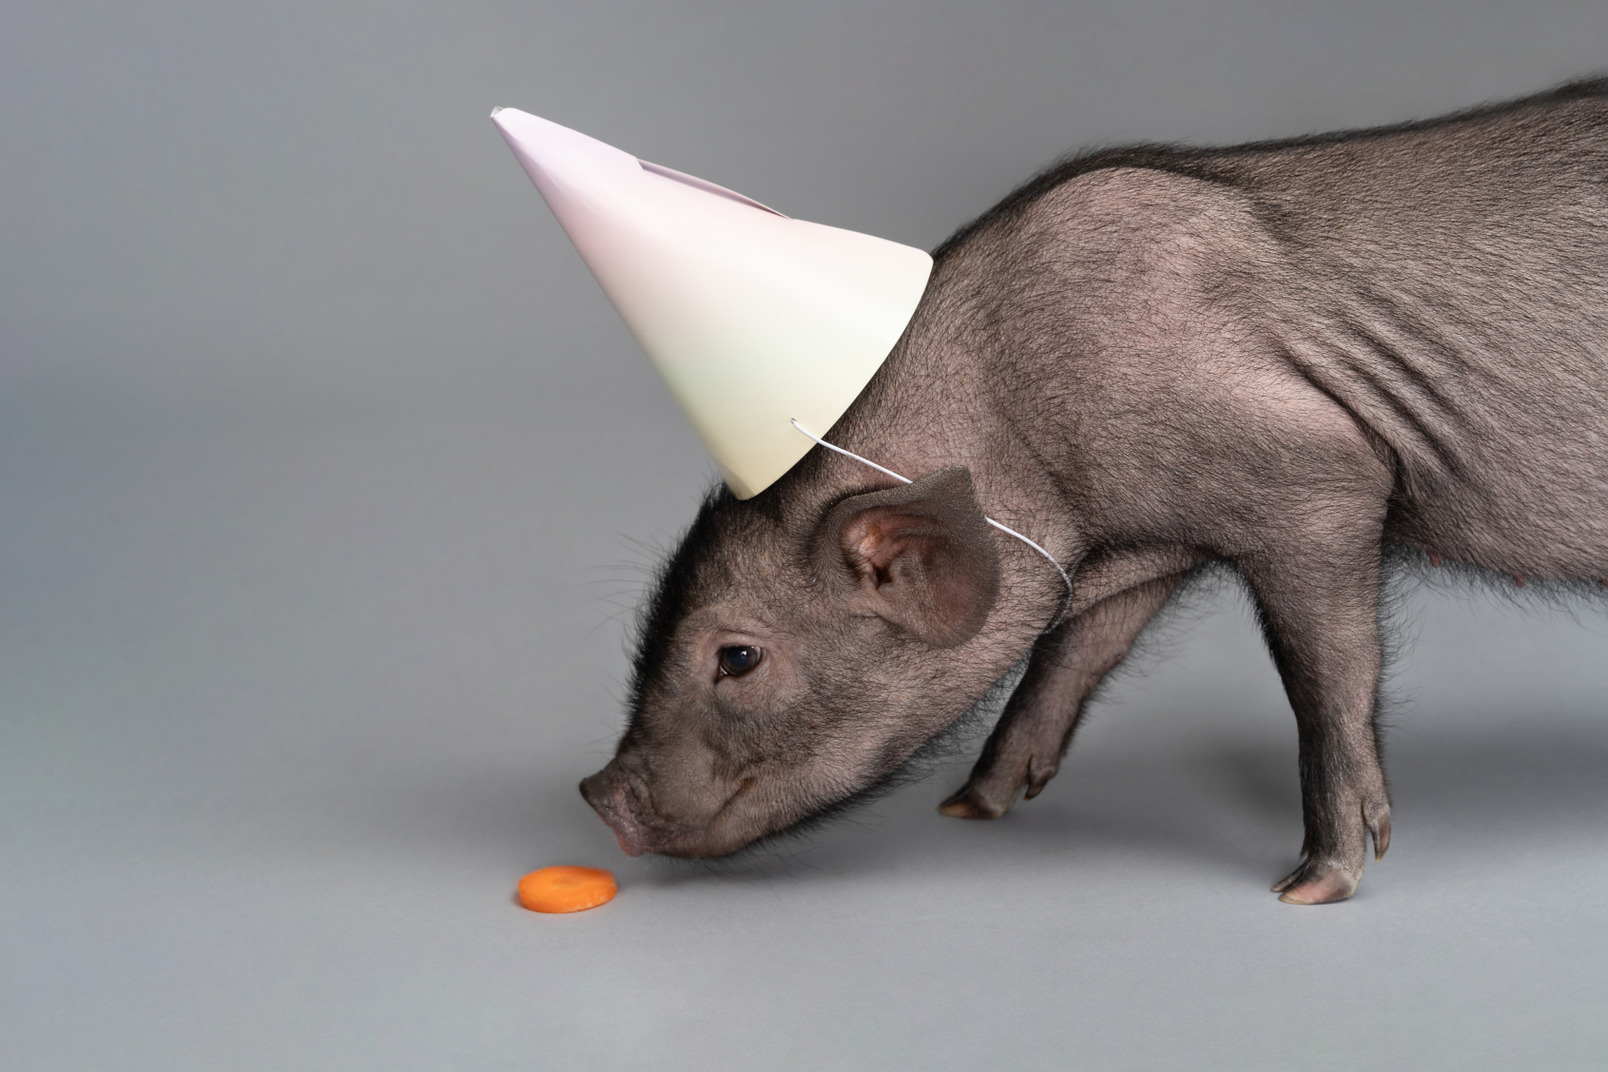 Cute miniature pig with a party hat on its head is sniffing a piece of carrot